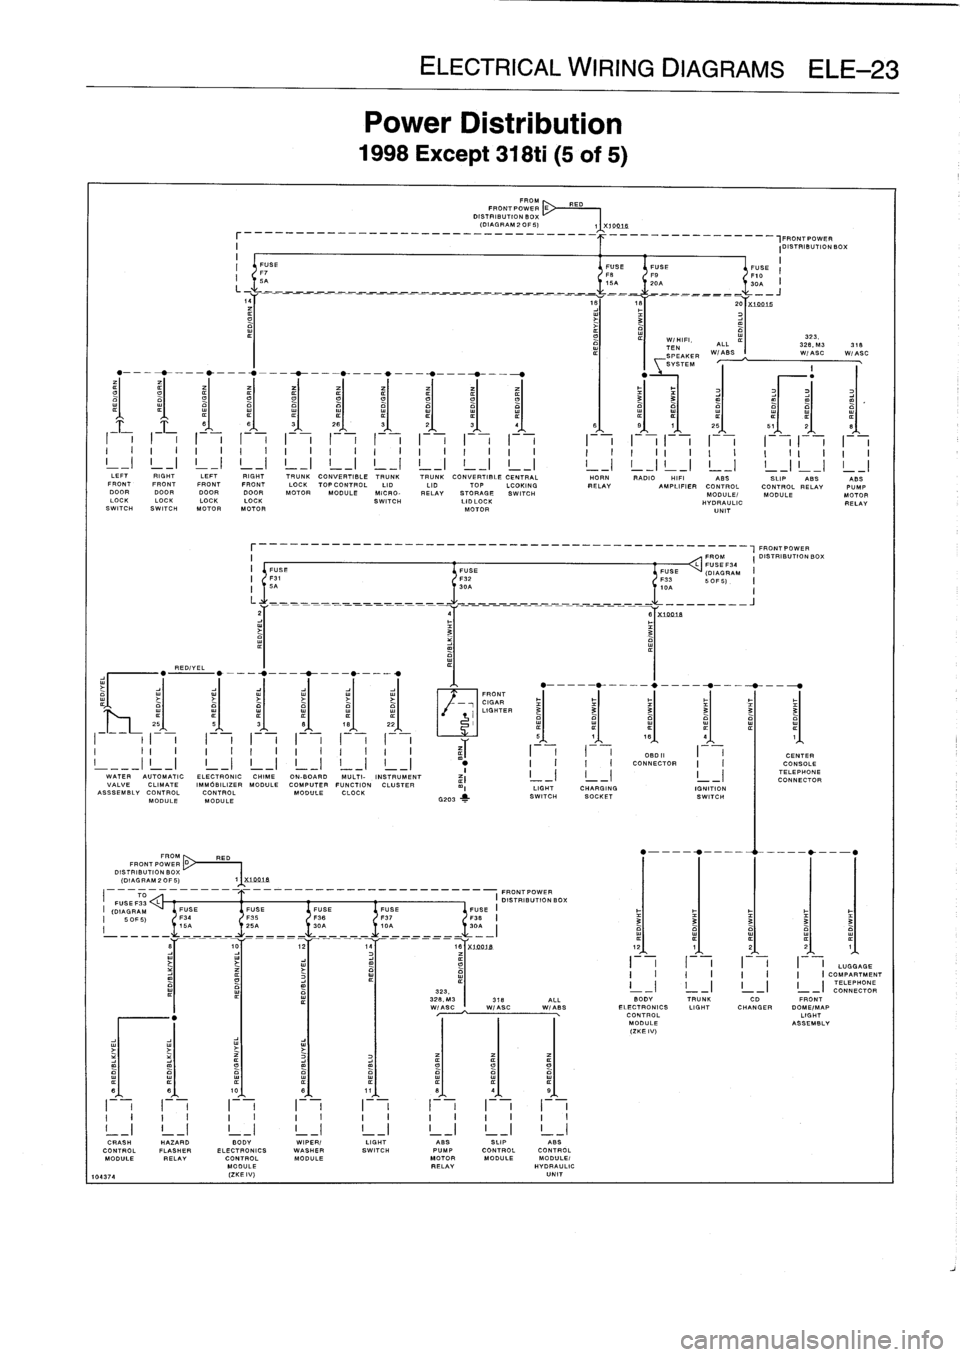 BMW 318i 1997 E36 Owners Guide 
REDIYEL

FROM
RED
FRONT
PO
WE
R
D~
DISTRIBUTION
BOX
(DIAGRAM
2
OF
5)

_
_
_
_
_
_
_
_
_
_
__
,FRONTPOWER
I

	

IDISTRIBUTIONBOX
I

	

II
FUSE

	

FUSEFUSE

	

FUSE
F7

	

FS

	

FO

	

F10
I
I
5A

	
